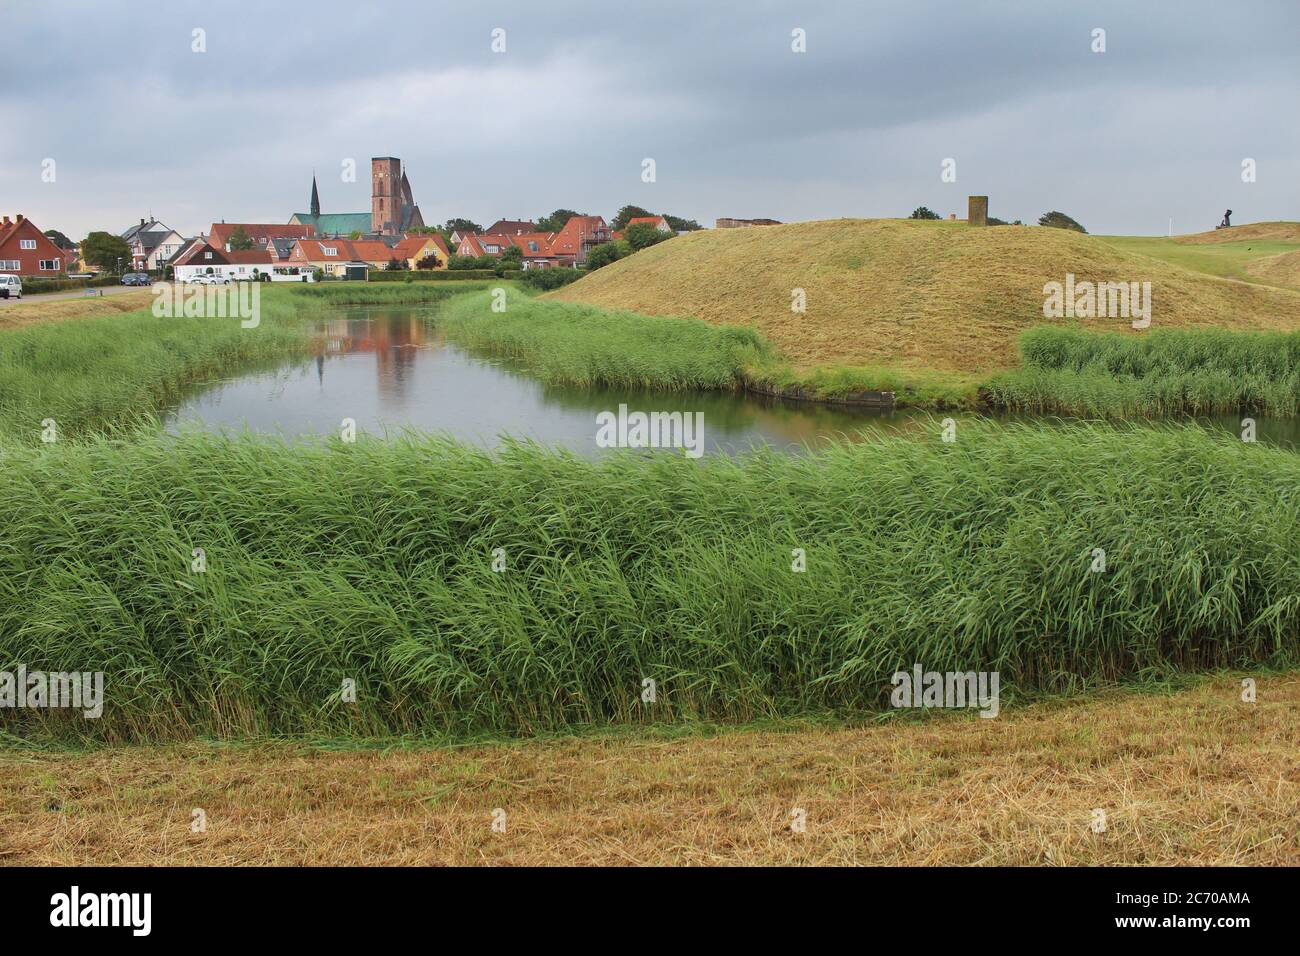 The scenic moated ruins of Riberhus (Castle) in summer, near the town of Ribe in Jutland, Denmark. Stock Photo